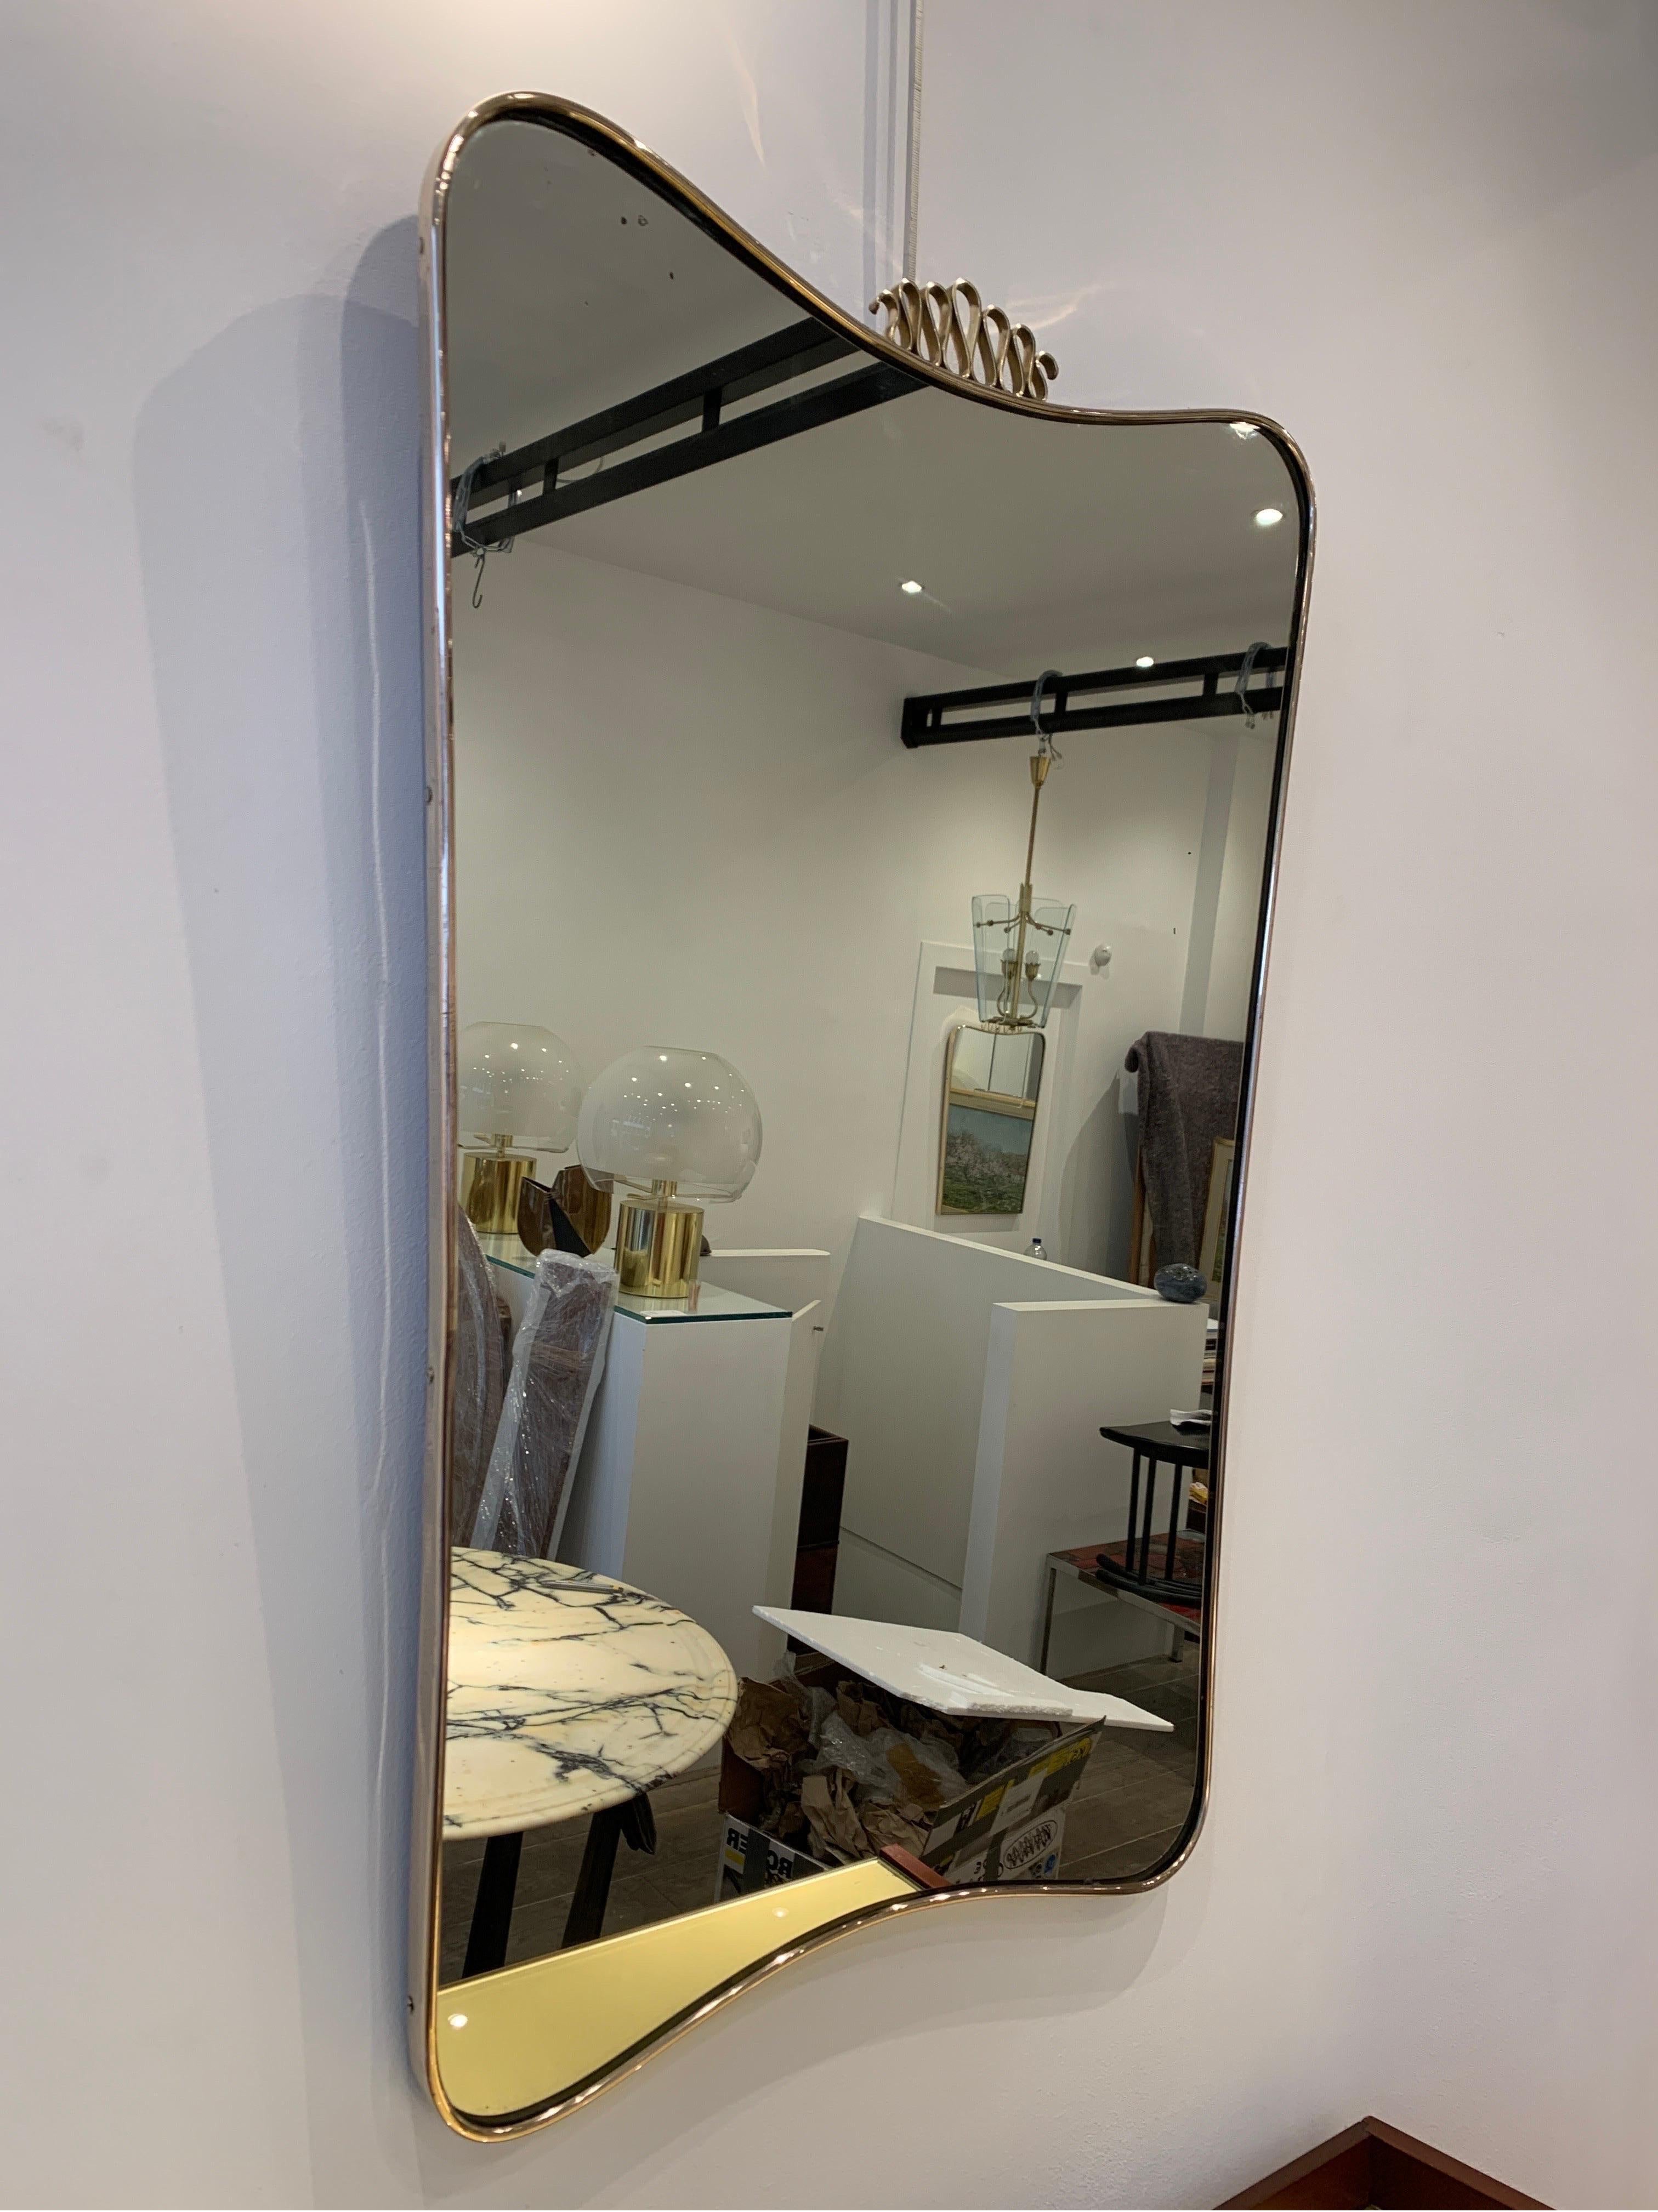 This type of brass mirrors were popular in the 1940s. Gio Ponti designed some of the models. This particular is of the period and attributed to Gio Ponti. Ponti Mirrors were popular in high end Milanese home interior. He was the most famous designer